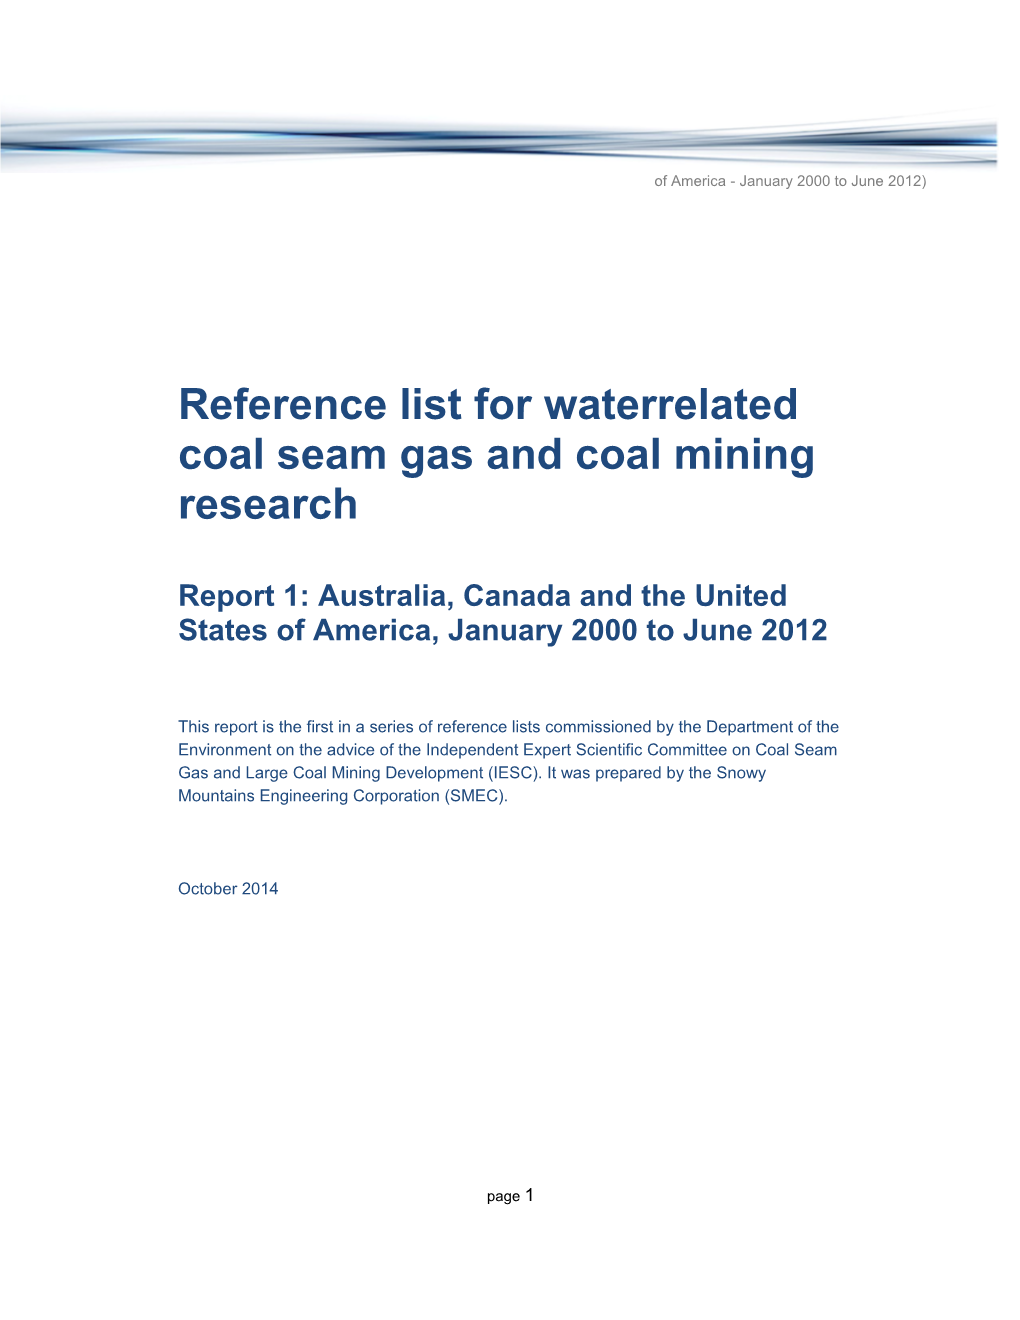 Reference List for Water Related Coal Seam Gas and Coal Mining Research - Report 1: Australia